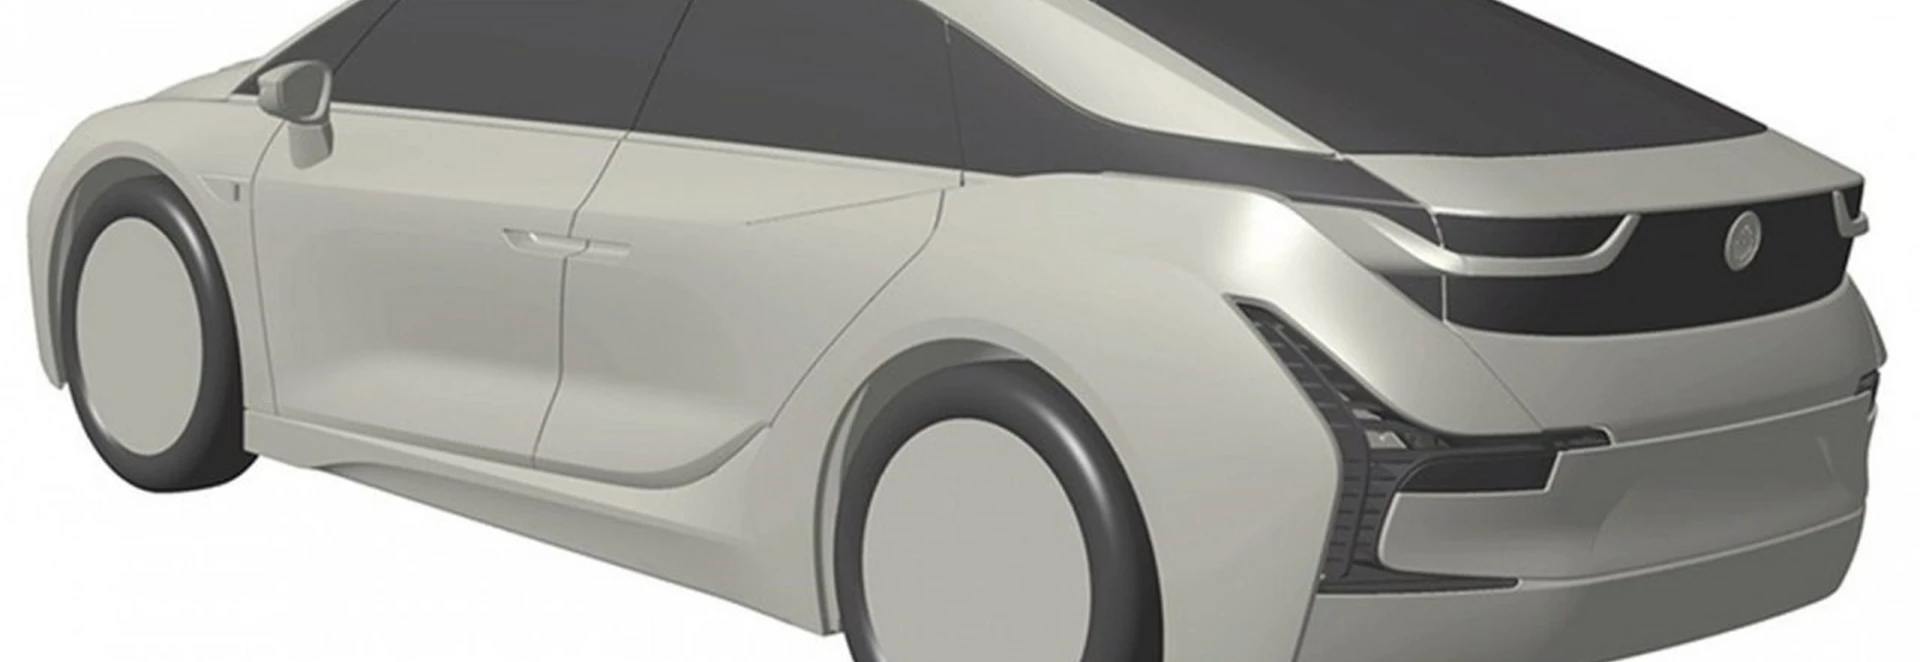 Patent images offer best look yet at the new BMW i5 electric car